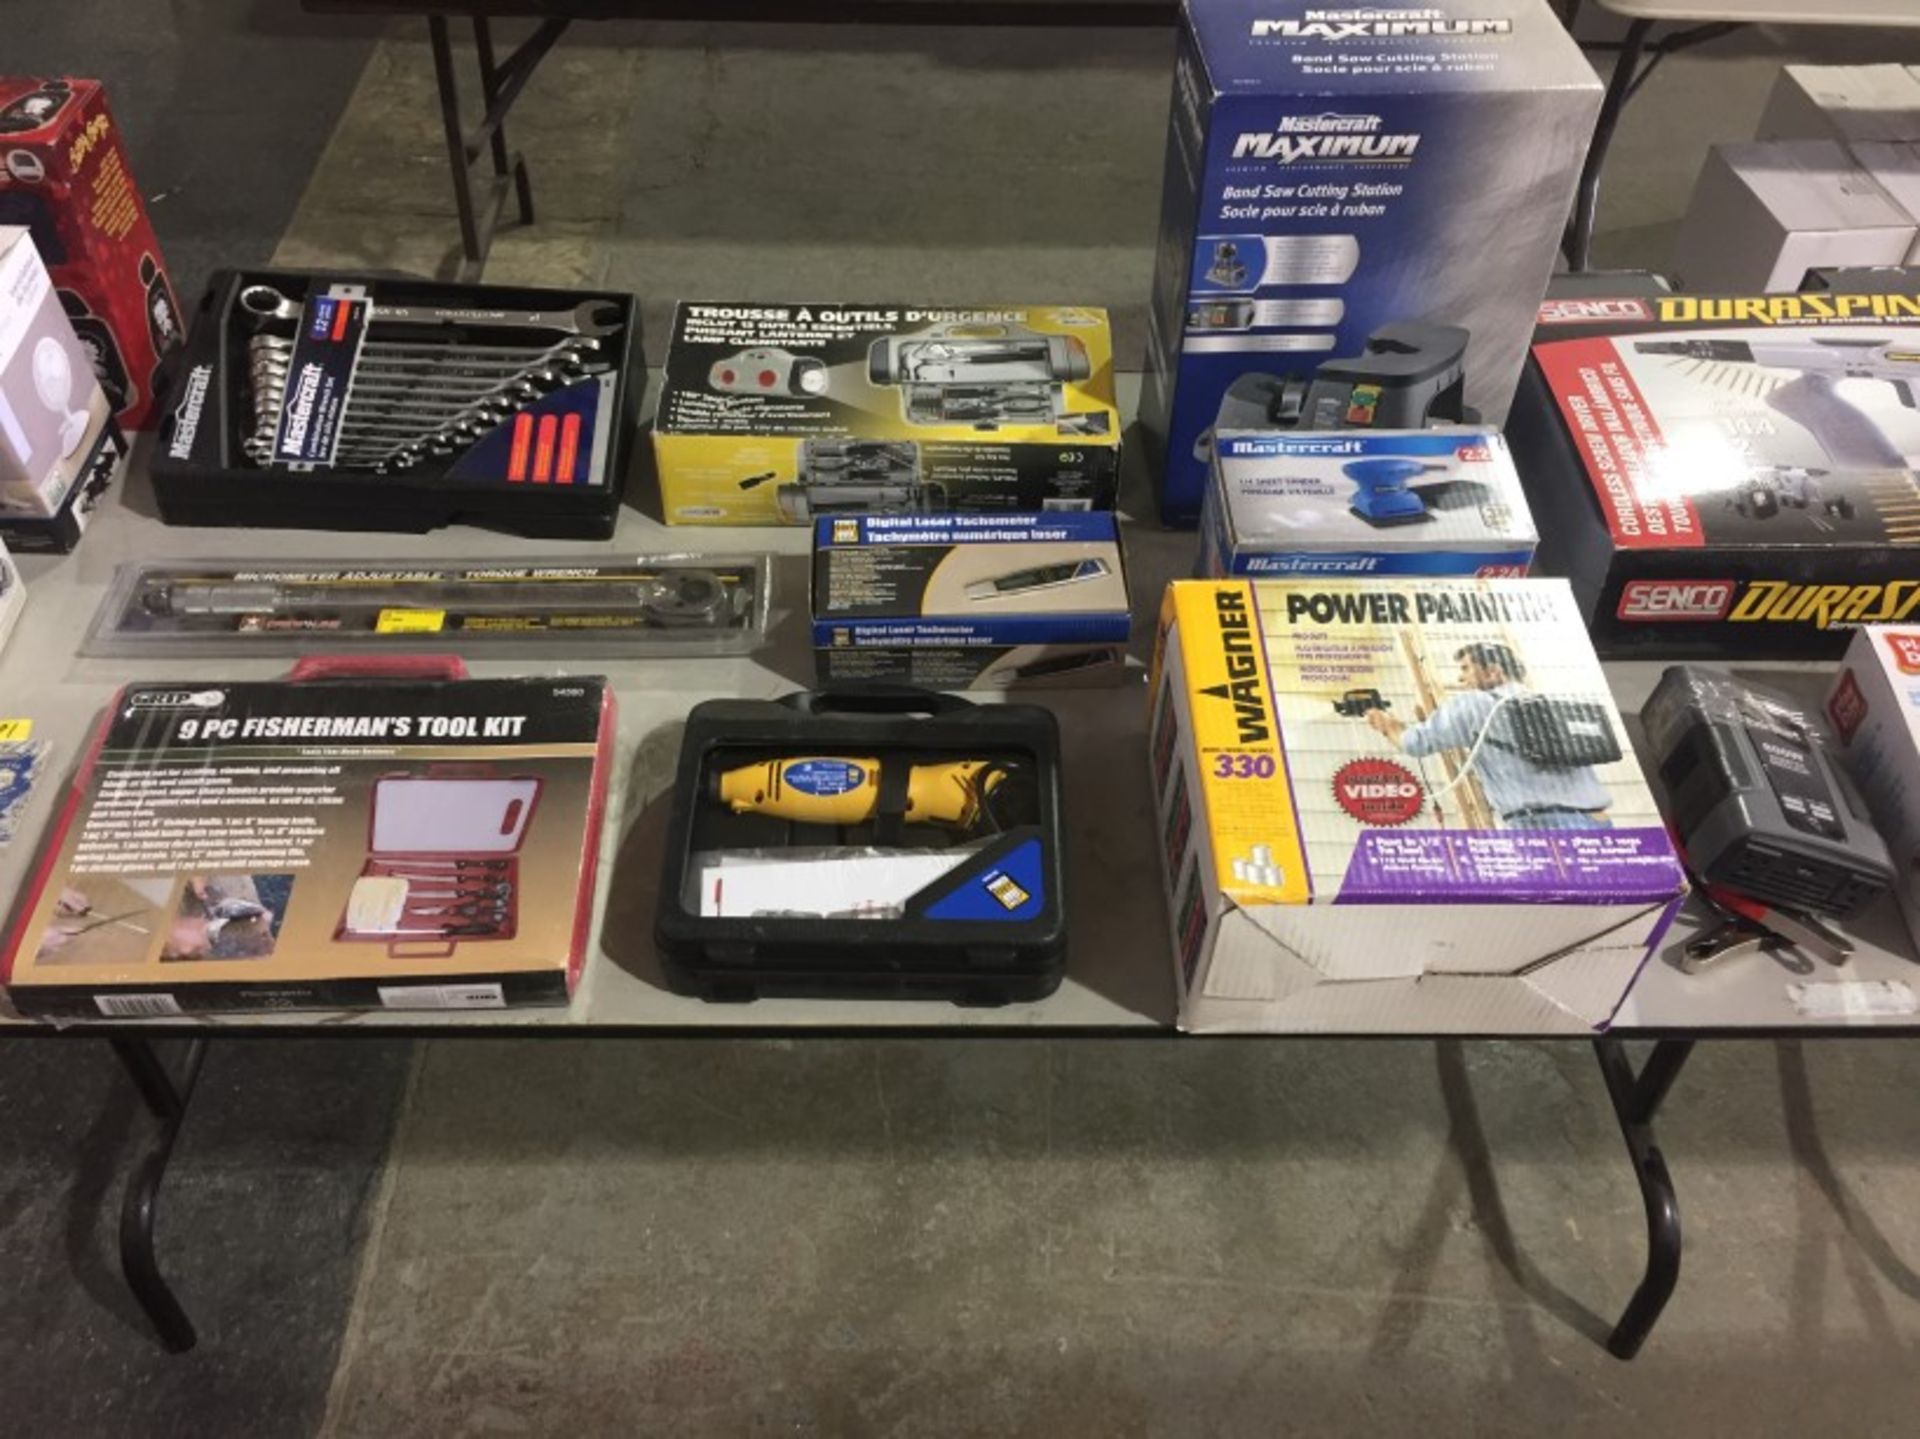 PART 2 OF TOOL AND STORE RETURN DISPERSAL AUCTION